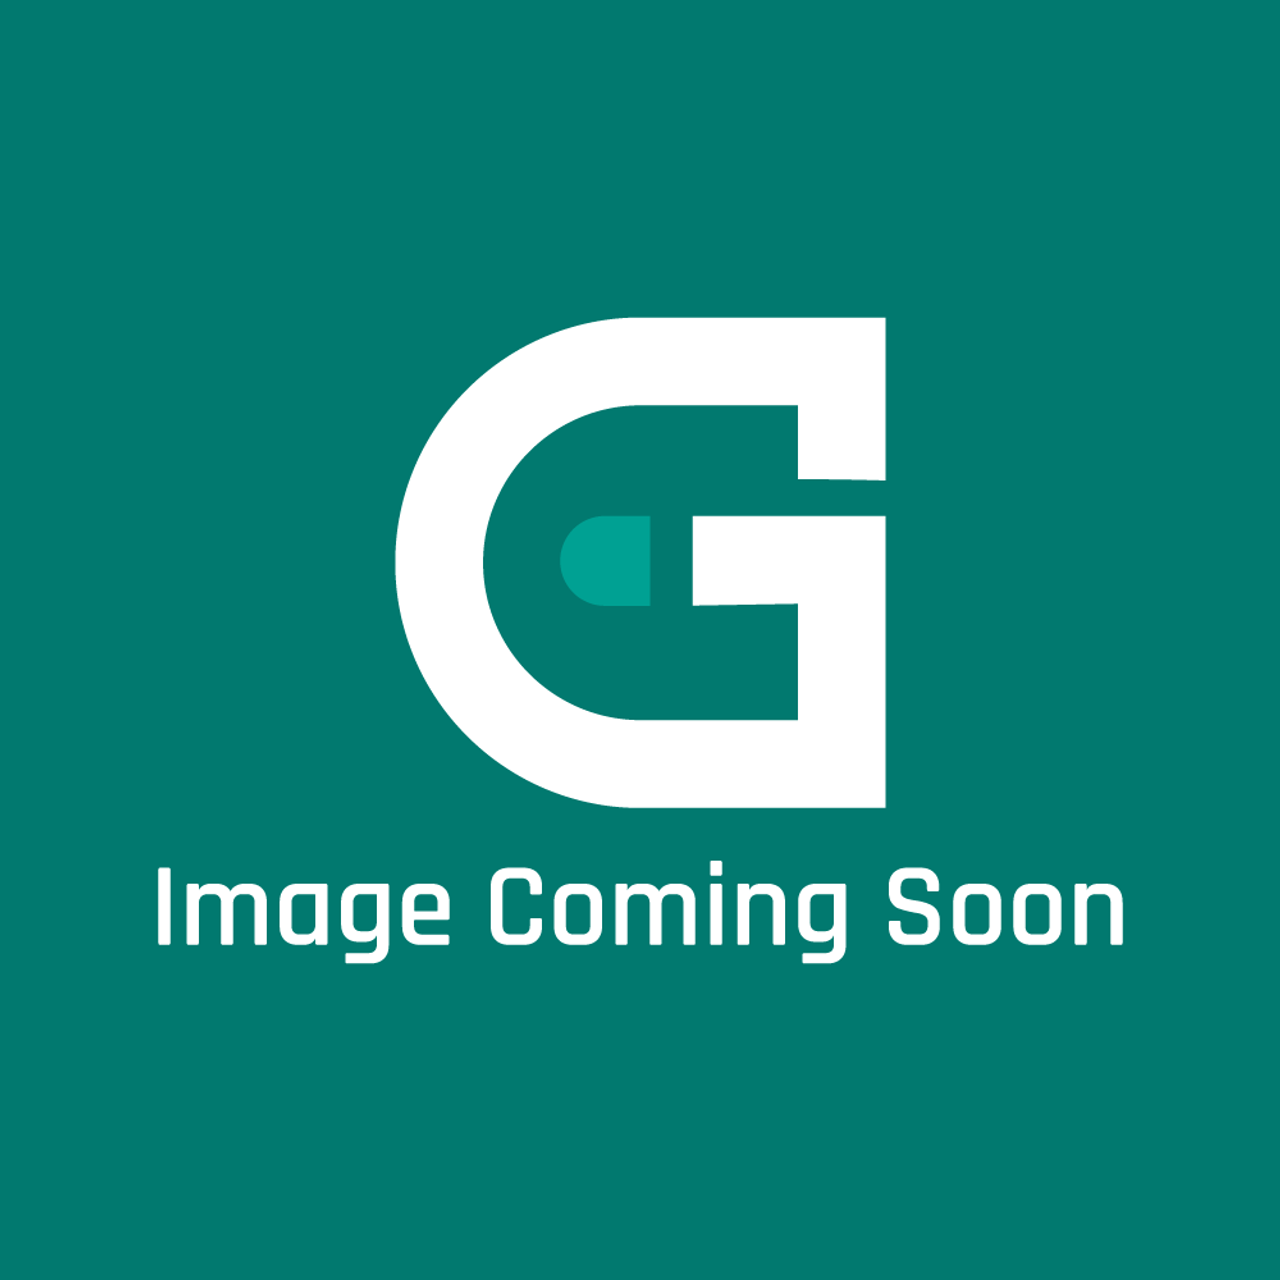 GE Appliances WD34X25748 - Black Outer Door Service Asm - Image Coming Soon!